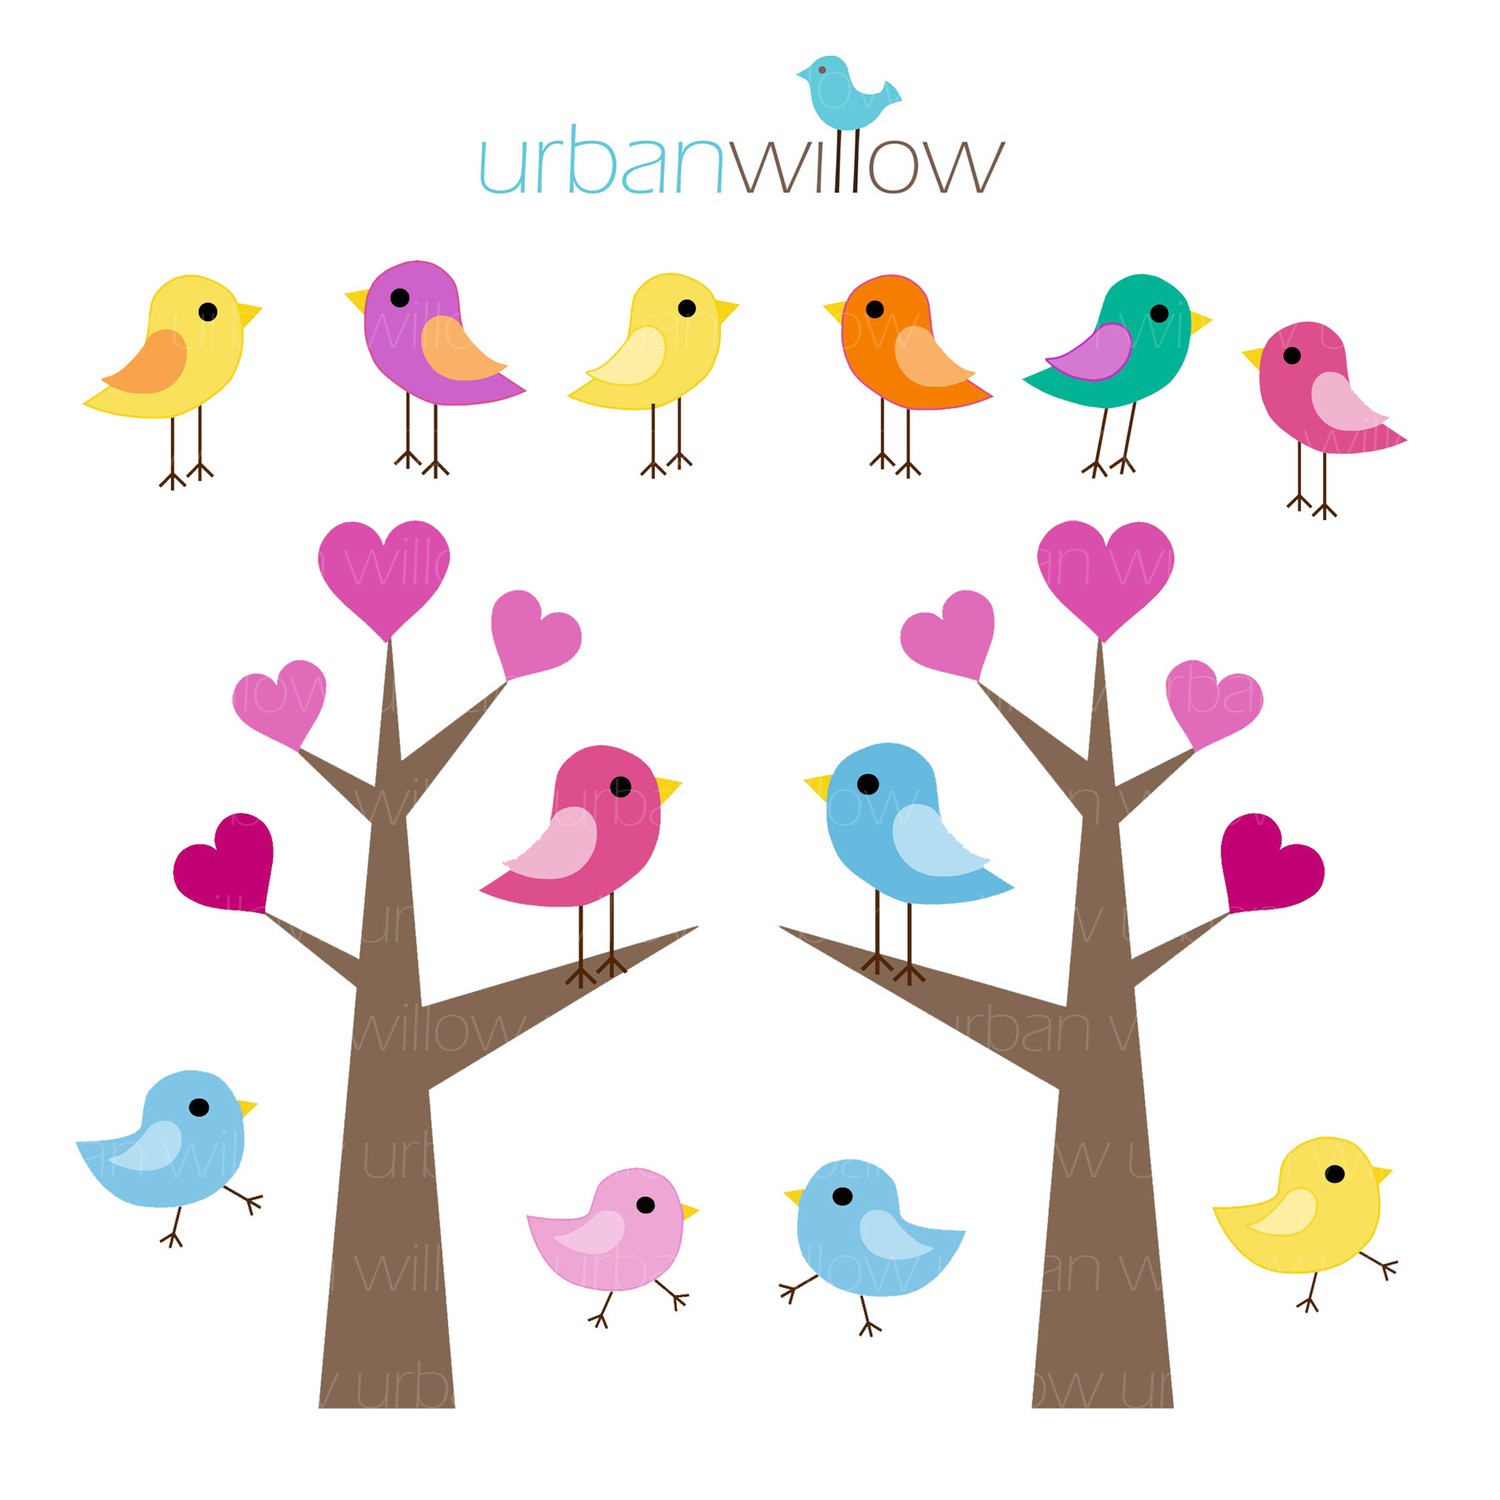 Love Birds Clipart Black And White | Clipart Panda - Free Clipart ...